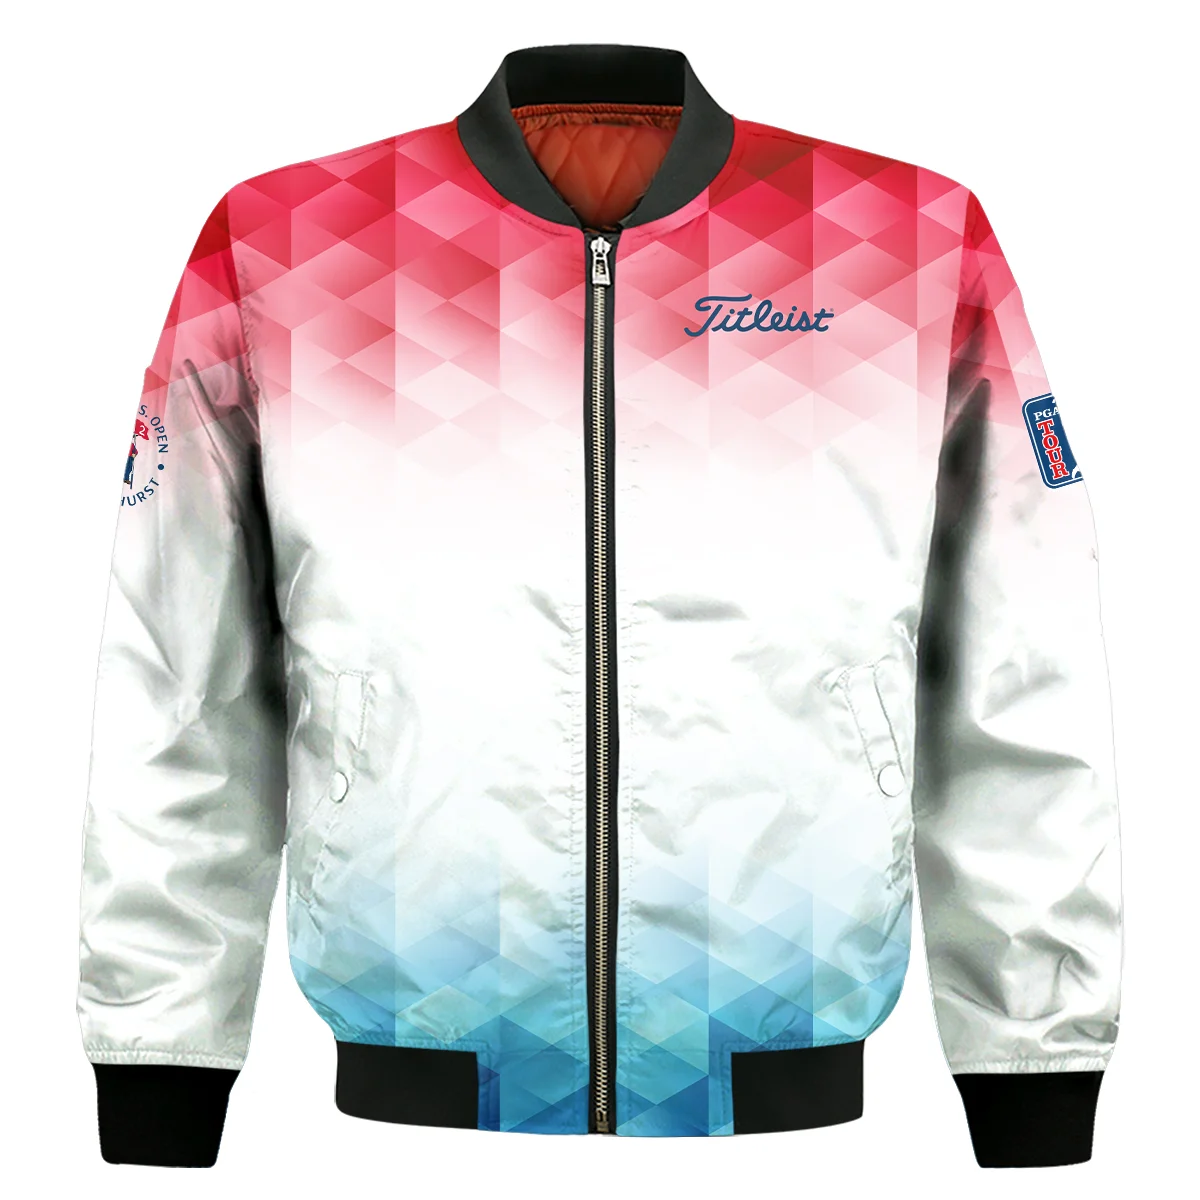 124th U.S. Open Pinehurst Titleist Golf Sport Bomber Jacket Blue Red Abstract Geometric Triangles All Over Print Bomber Jacket